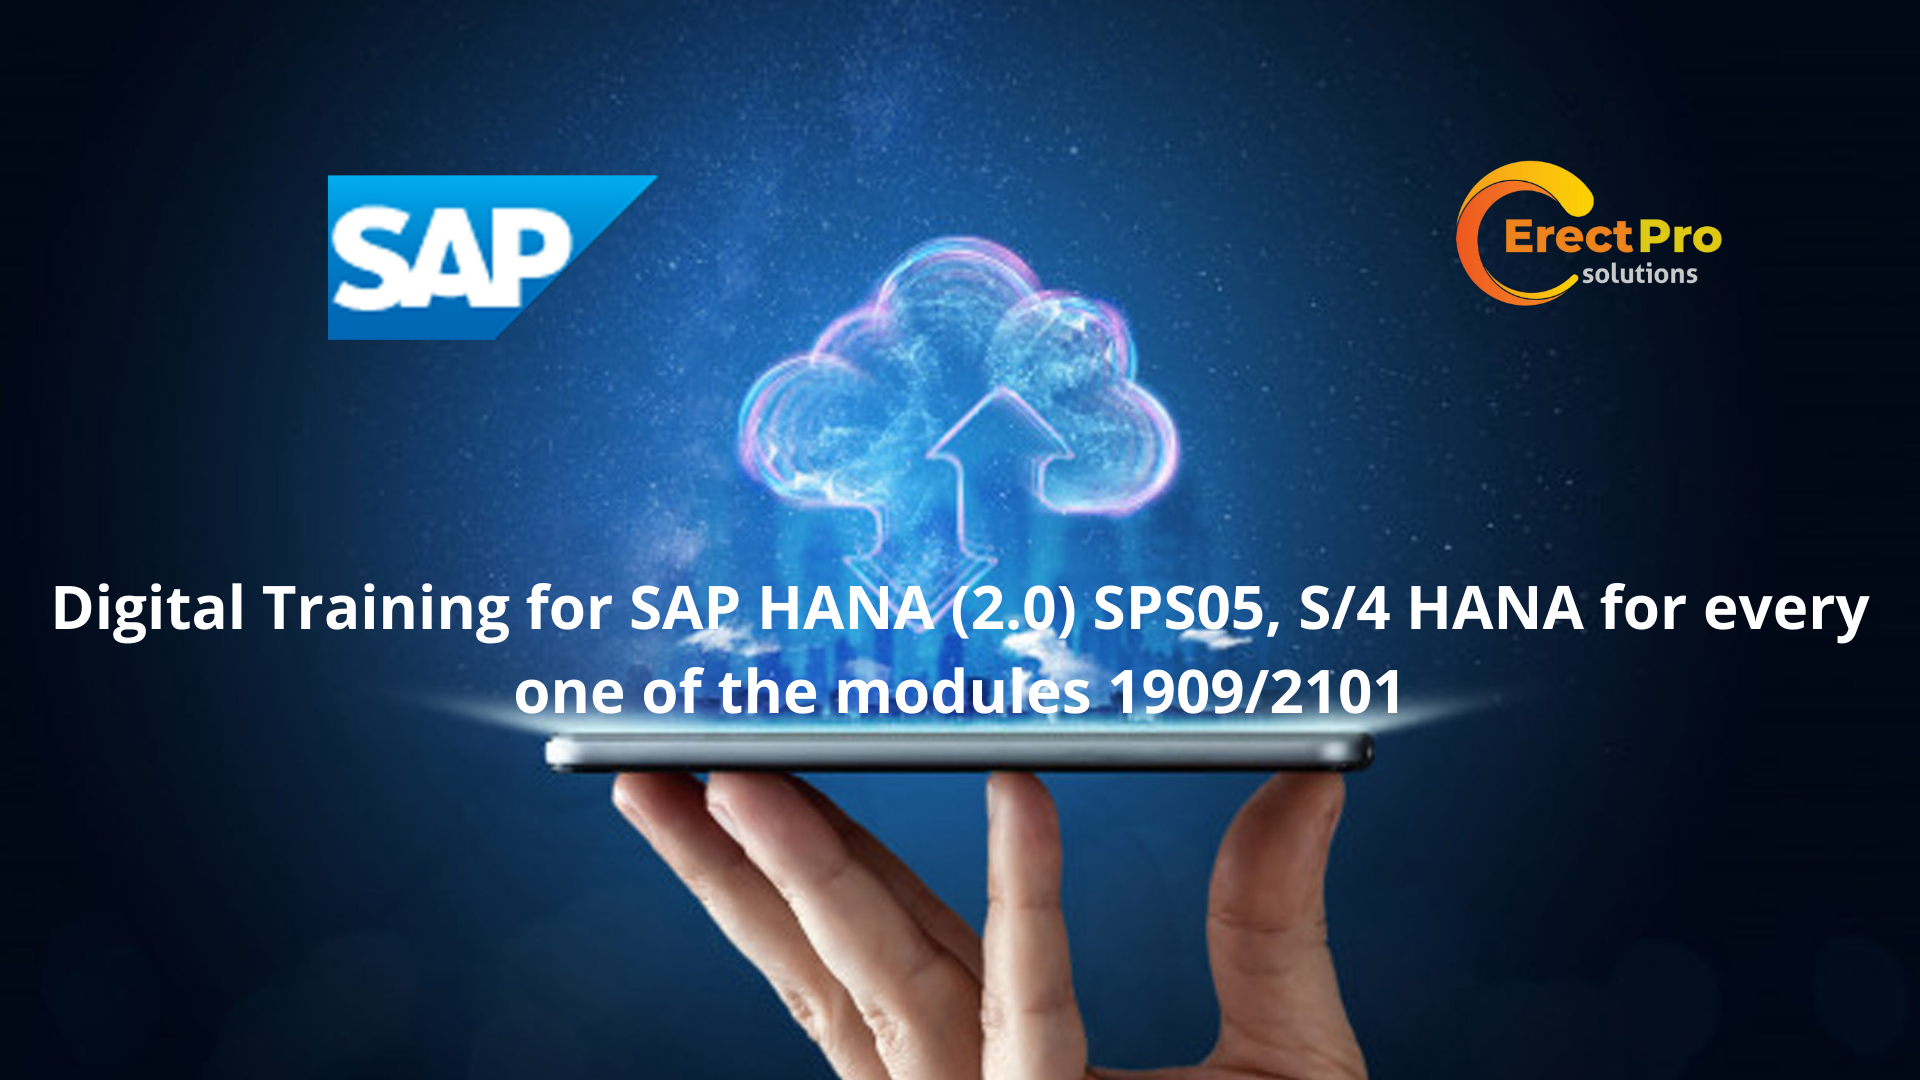 We are offering you Digital Training for SAP HANA (2.0) SPS05, S/4 HANA for every one of the modules 1909/2101.Education and LearningProfessional CoursesAll Indiaother